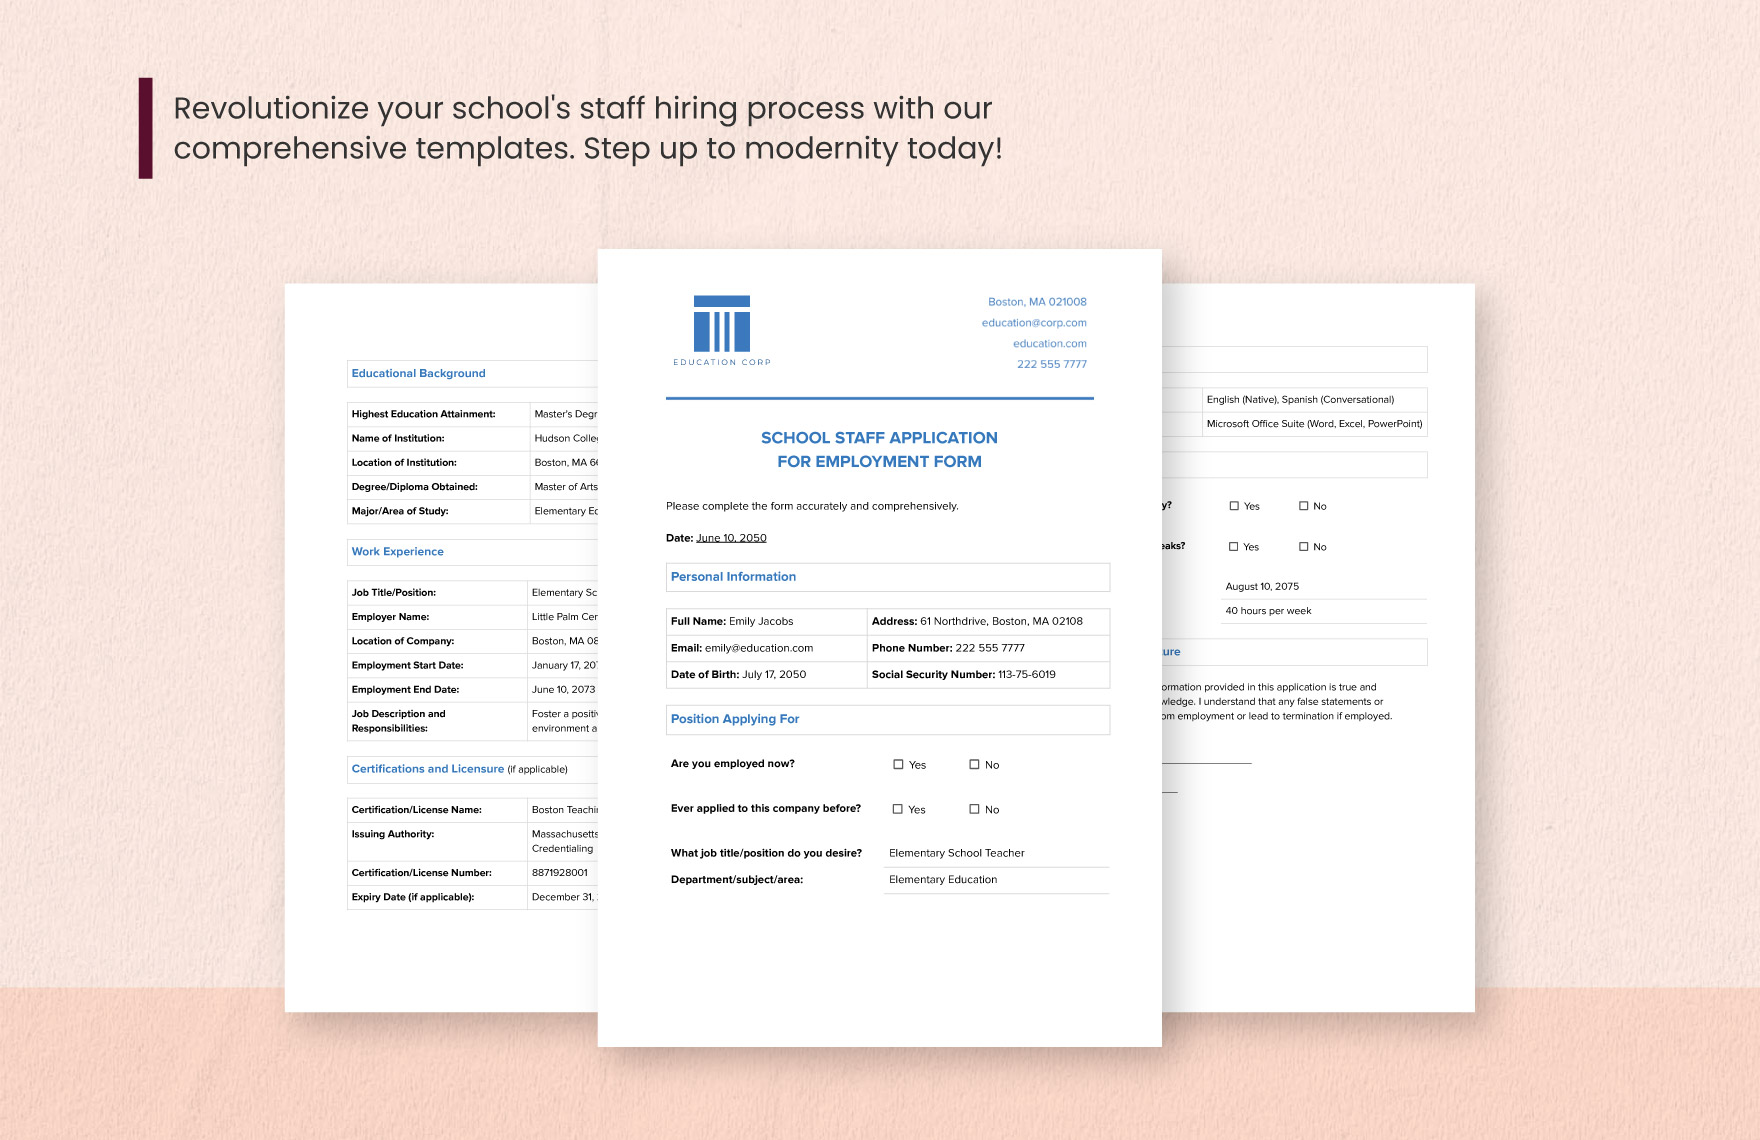 School Staff Application for Employment Form Template